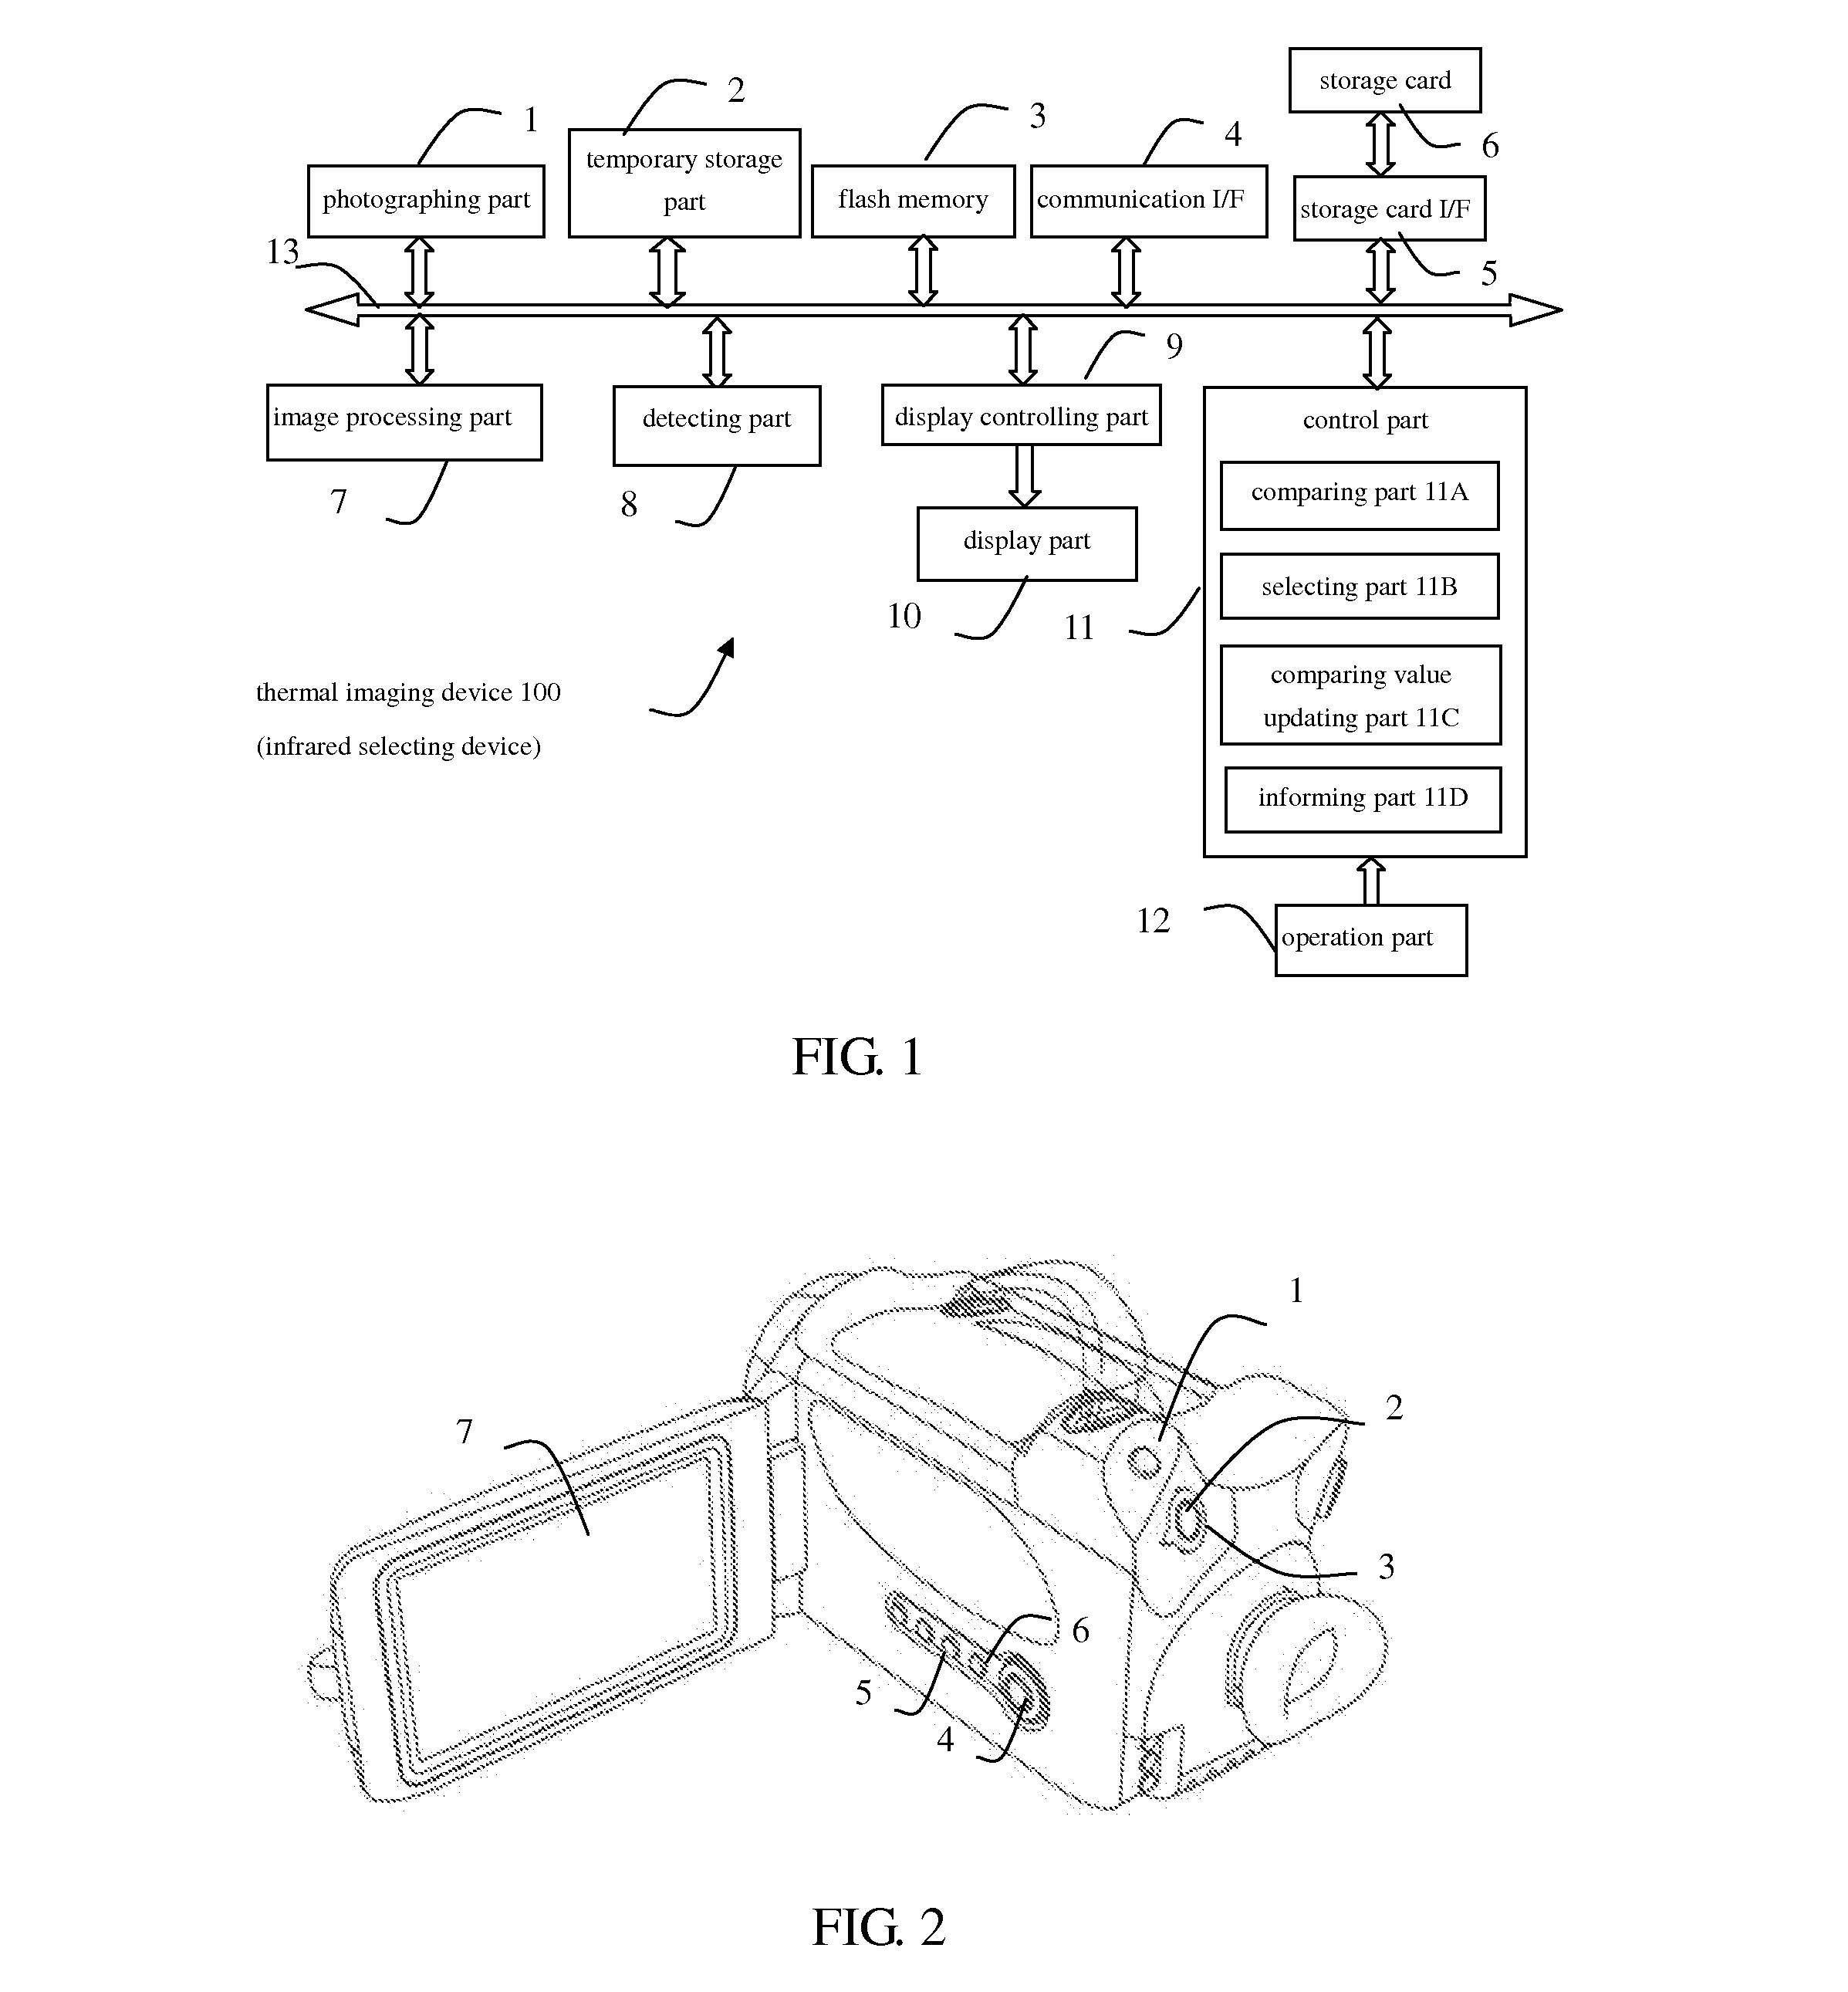 Infrared selecting device and method